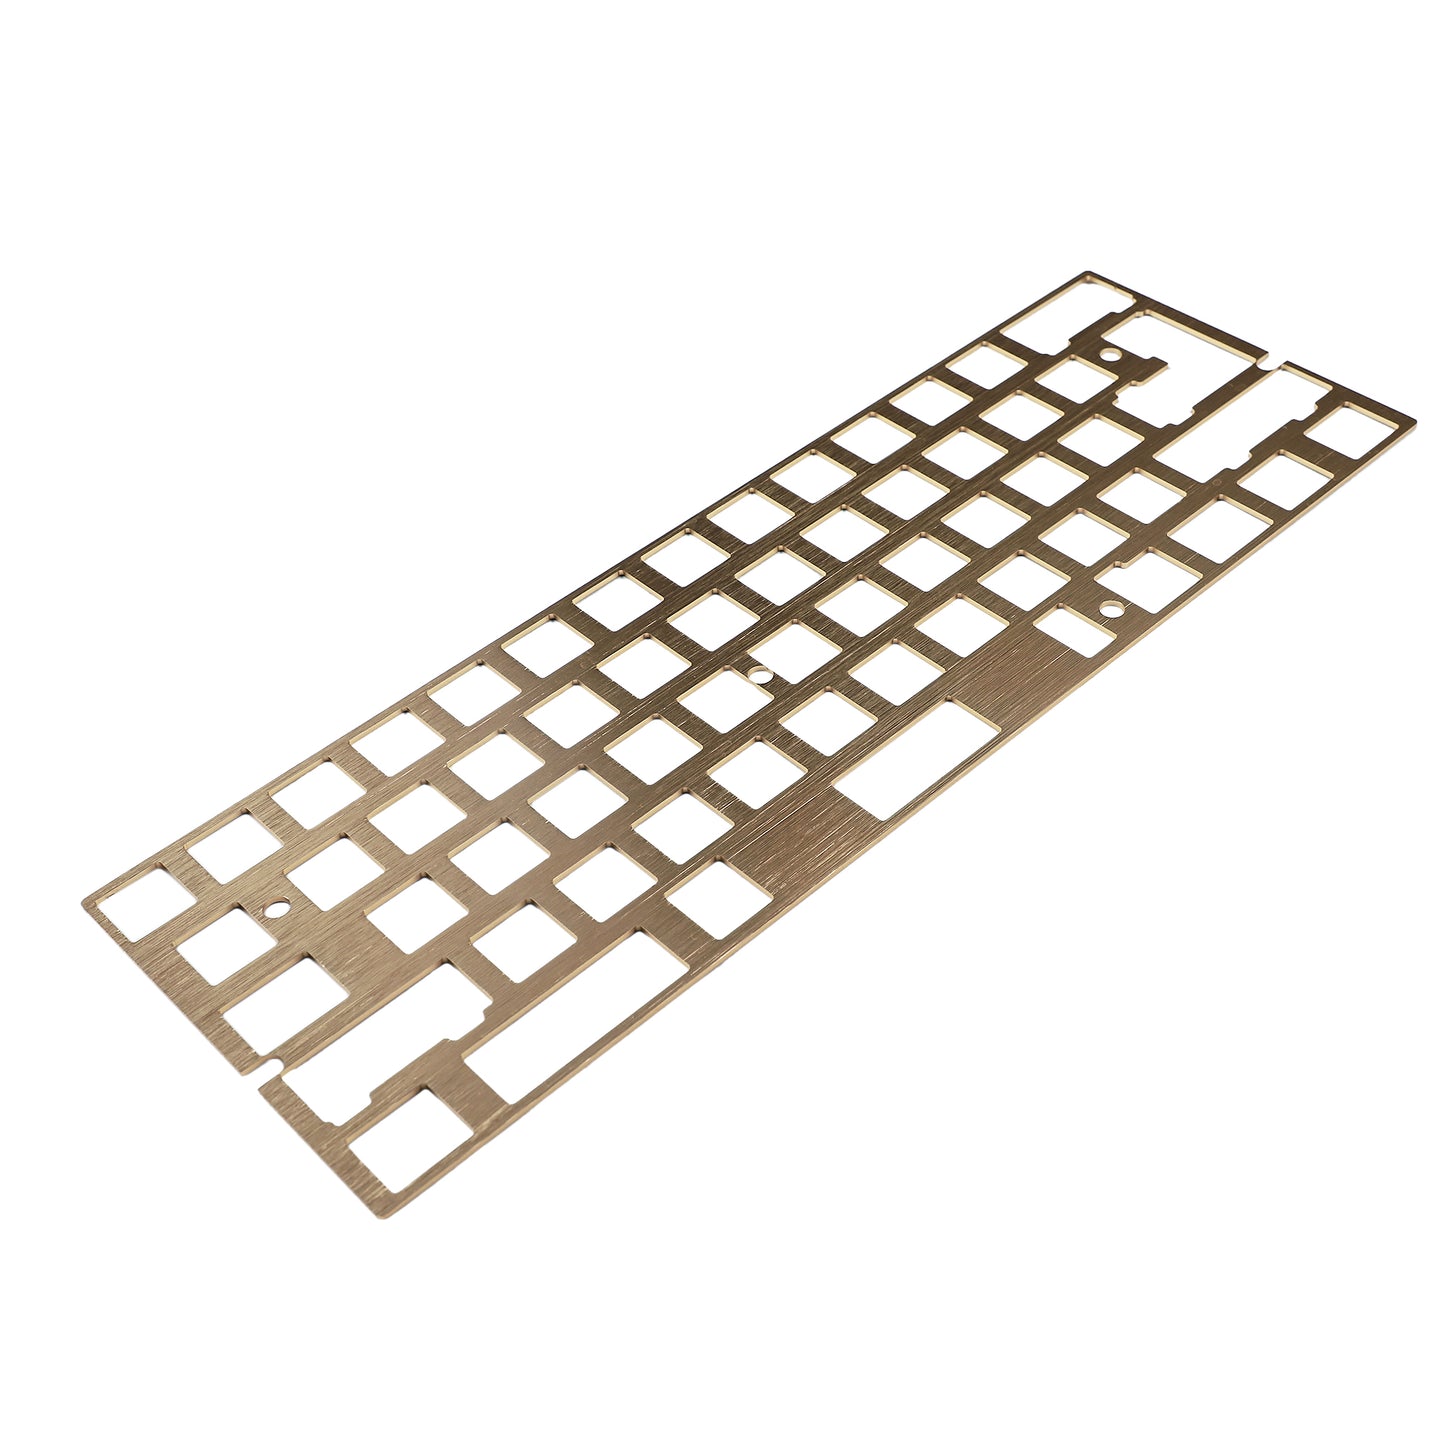 GH60 60% Universal Brush Aluminum Positioning Plate(ANSI ISO Supported/Multi-layout Supported)